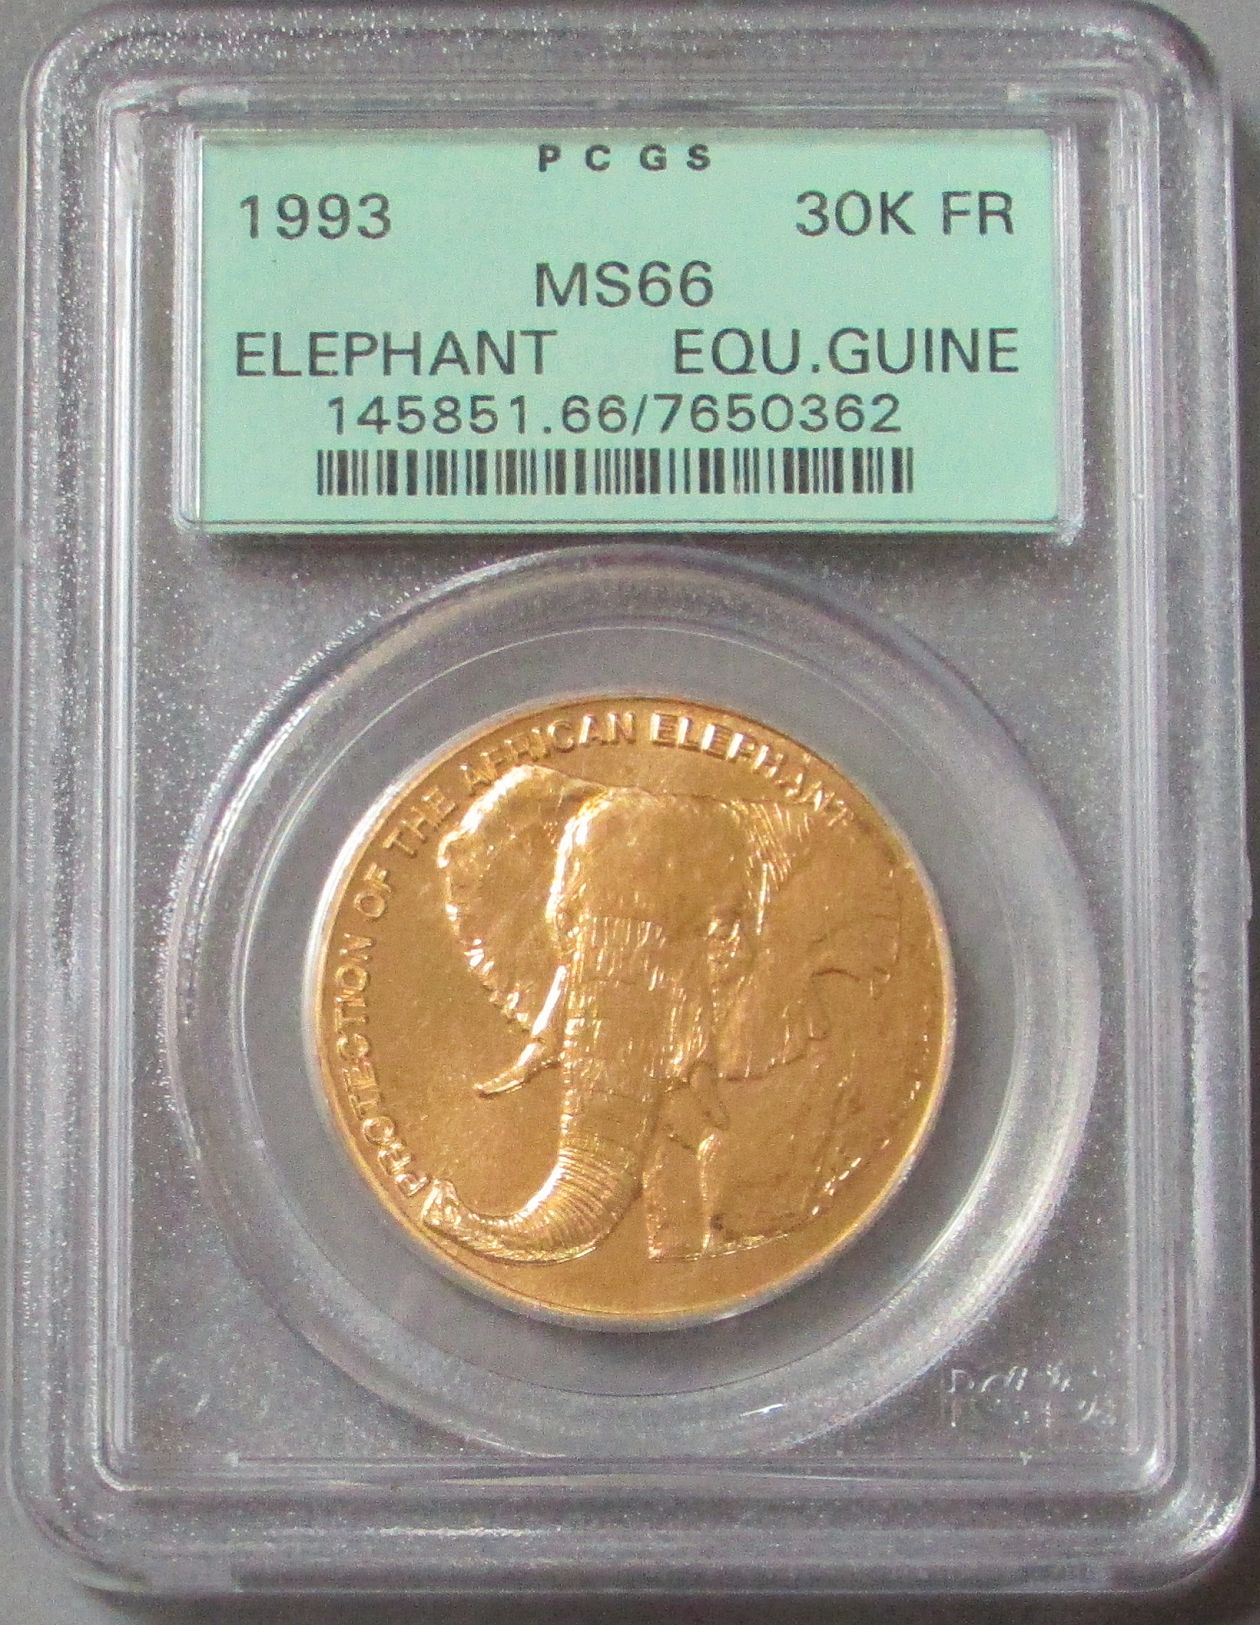 1993 GOLD EQUATORIAL GUINEA 30,000 FRANCOS PCGS MINT STATE 66 "ELEPHANT WILDLIFE CONSERVATION" ONLY 300 MINTED